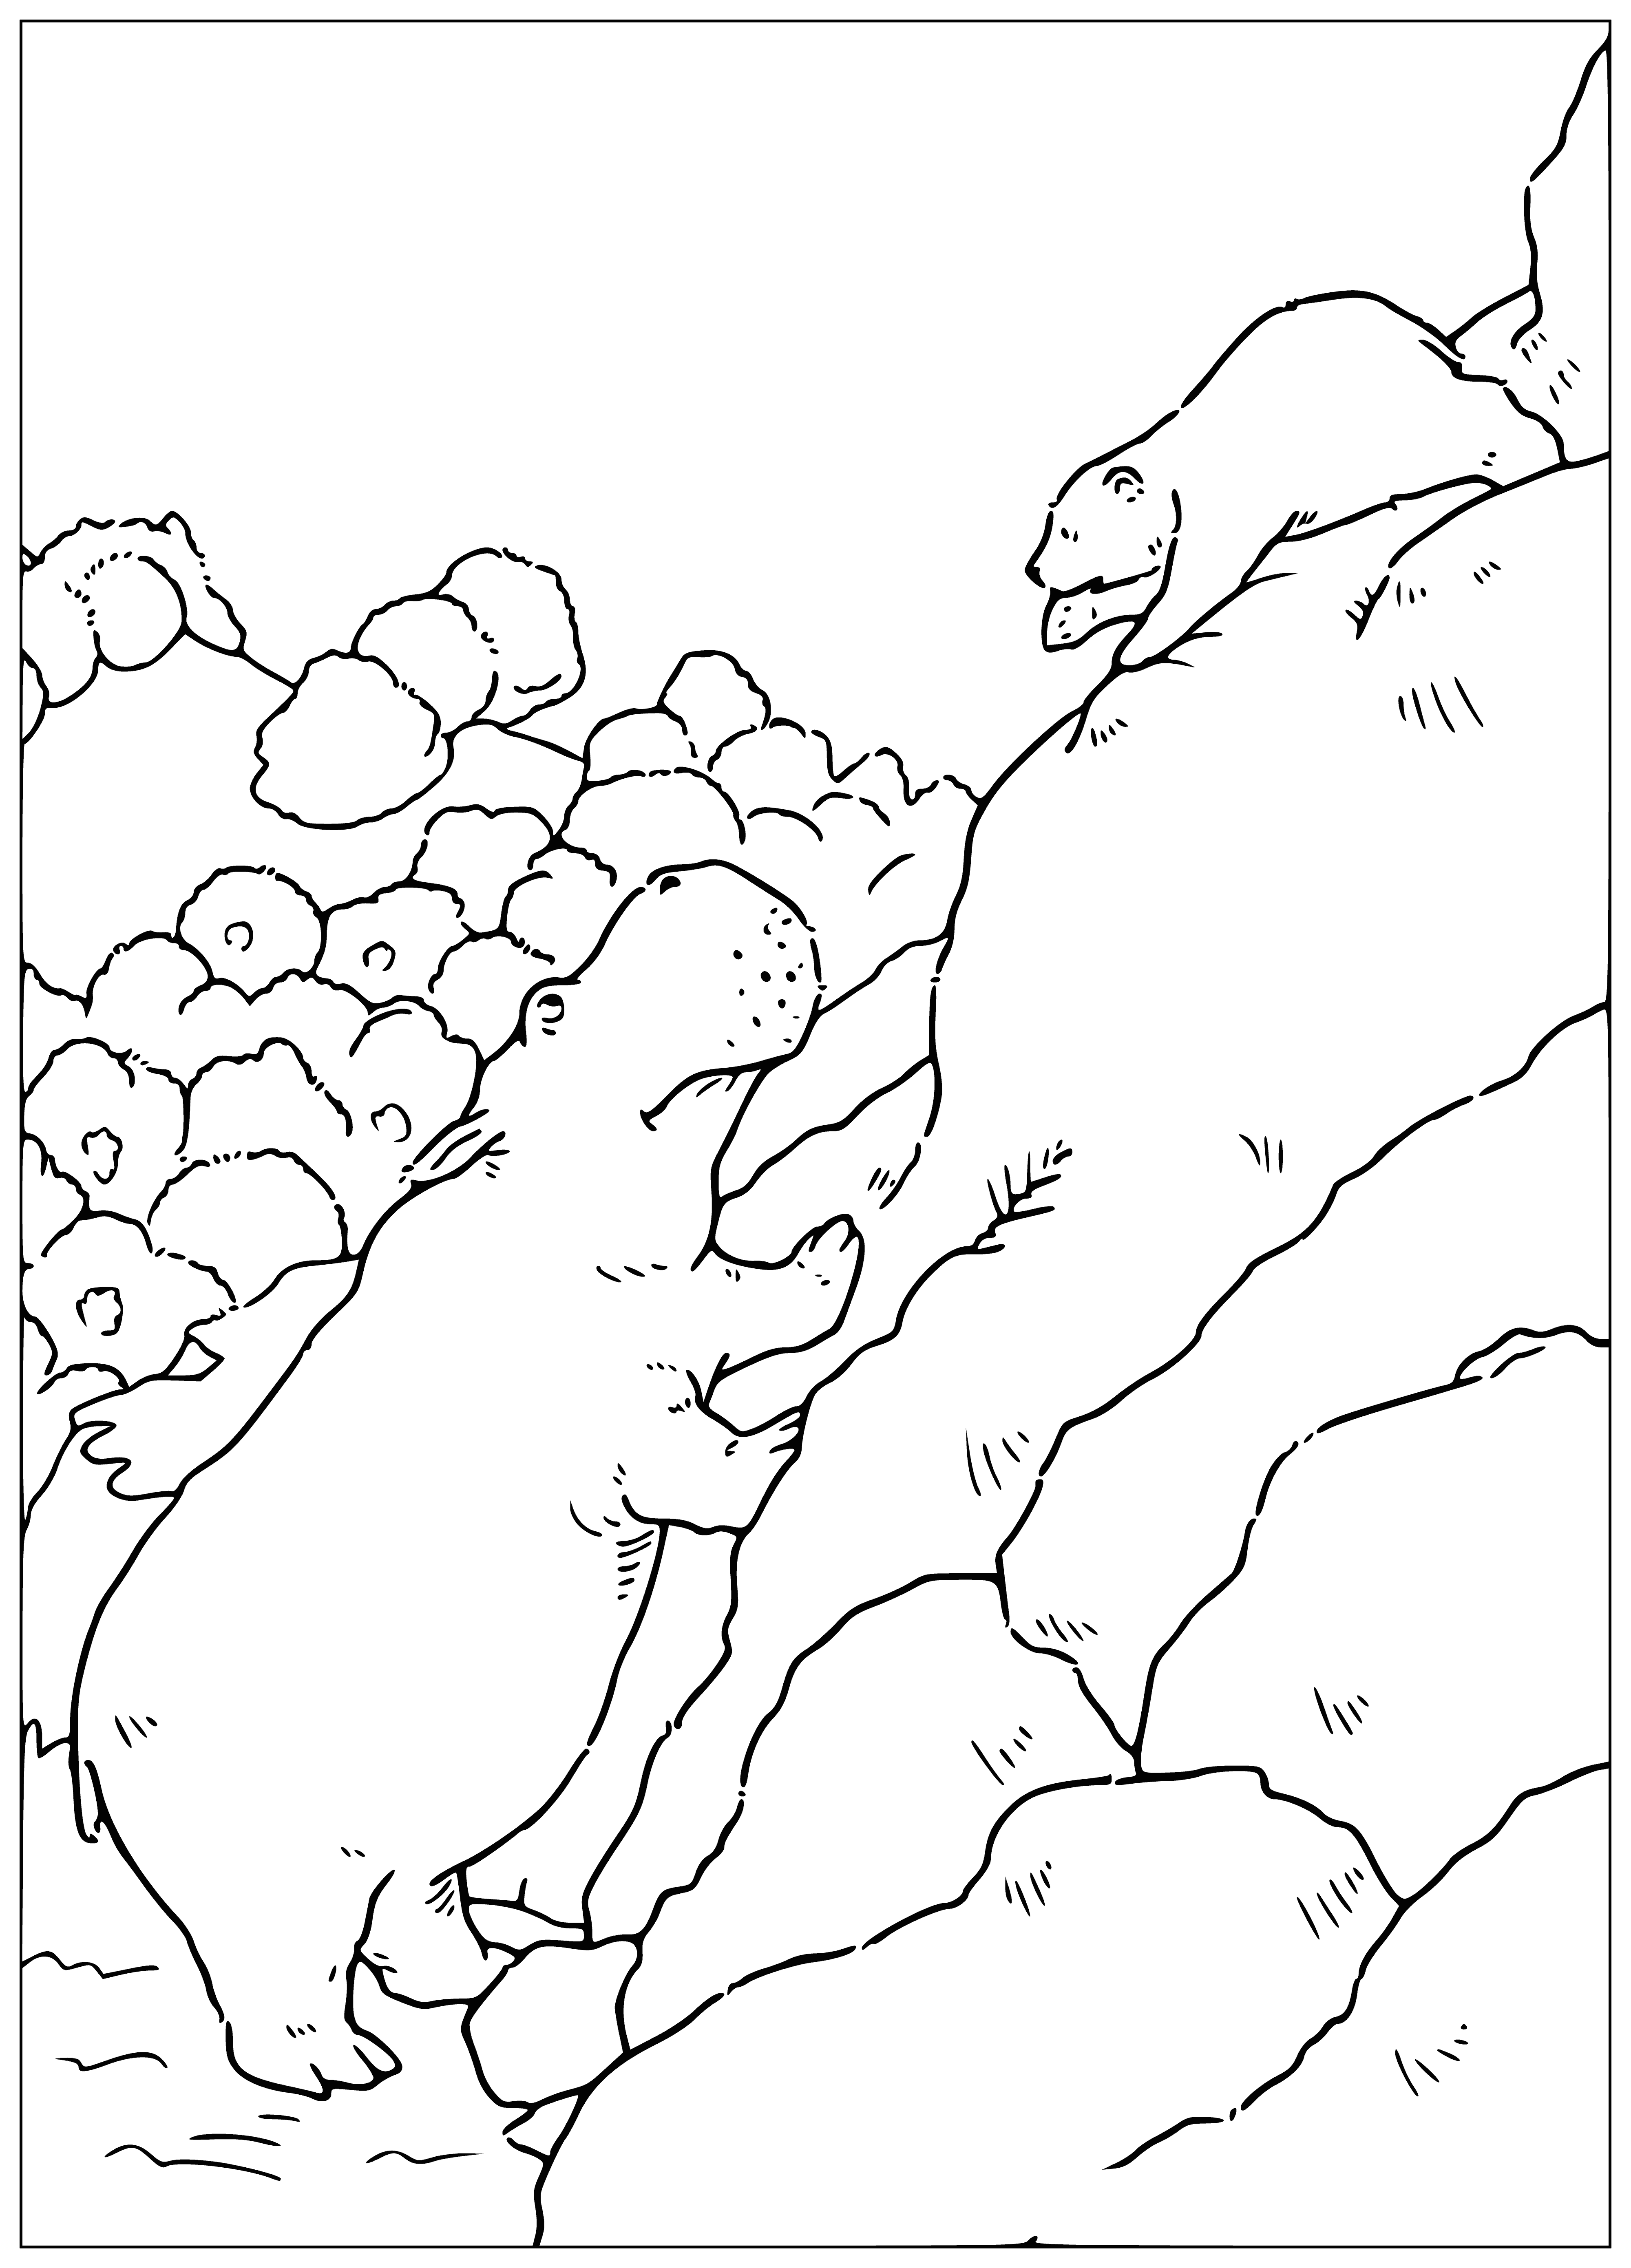 coloring page: Behemoth and Lars are having fun playing together - the large blue-grey bear tossing the white-grey cub in the air while they both laugh.